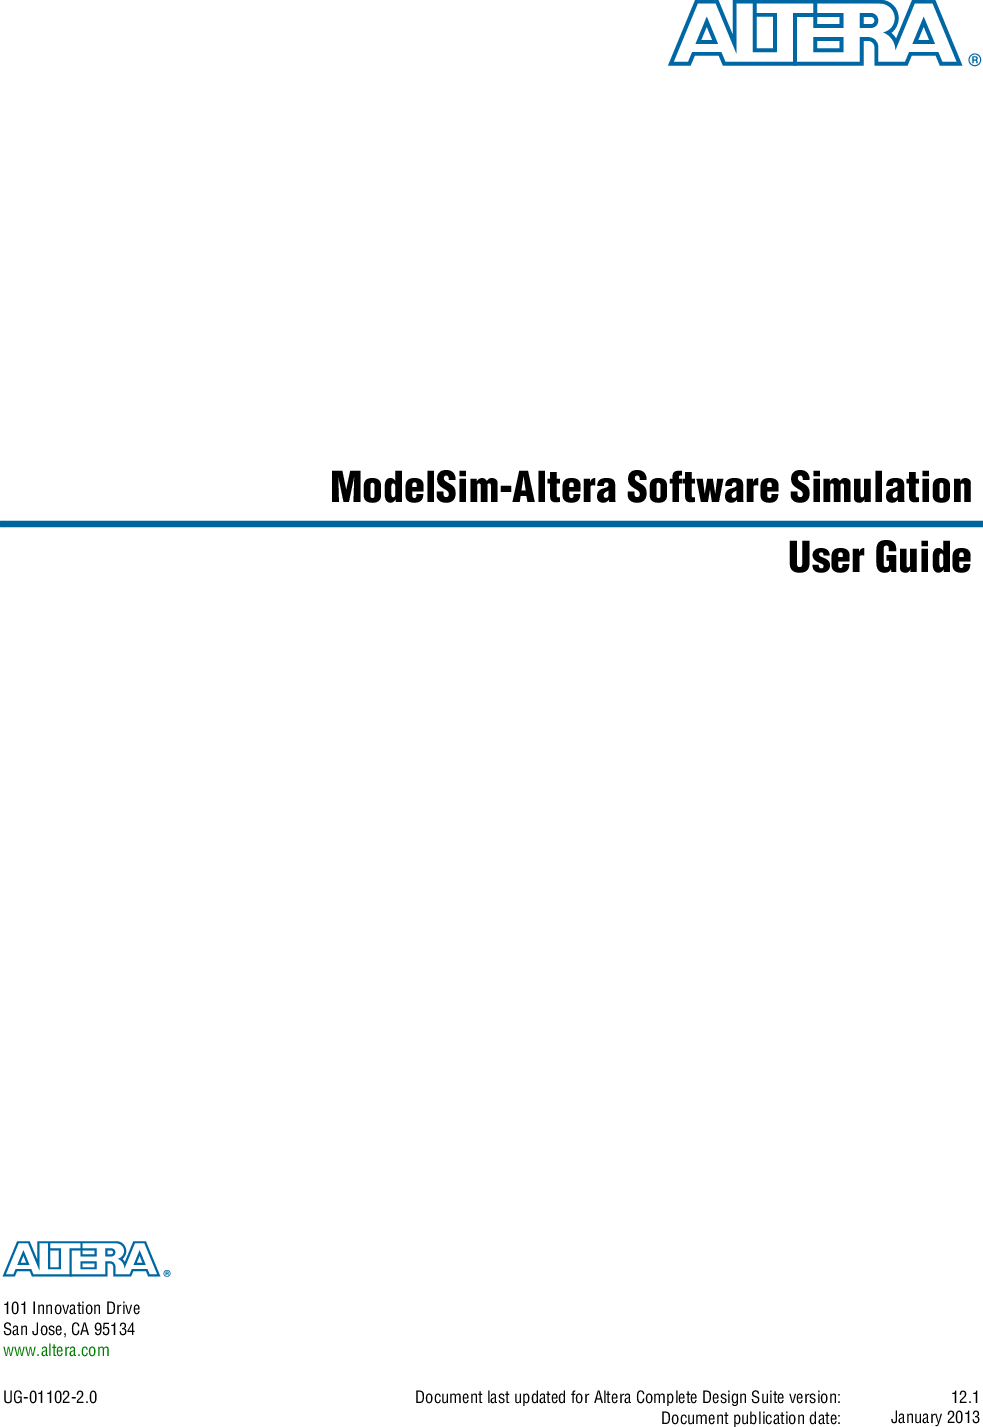 Page 2 of 12 - Sim-Altera Software Simulation User Guide